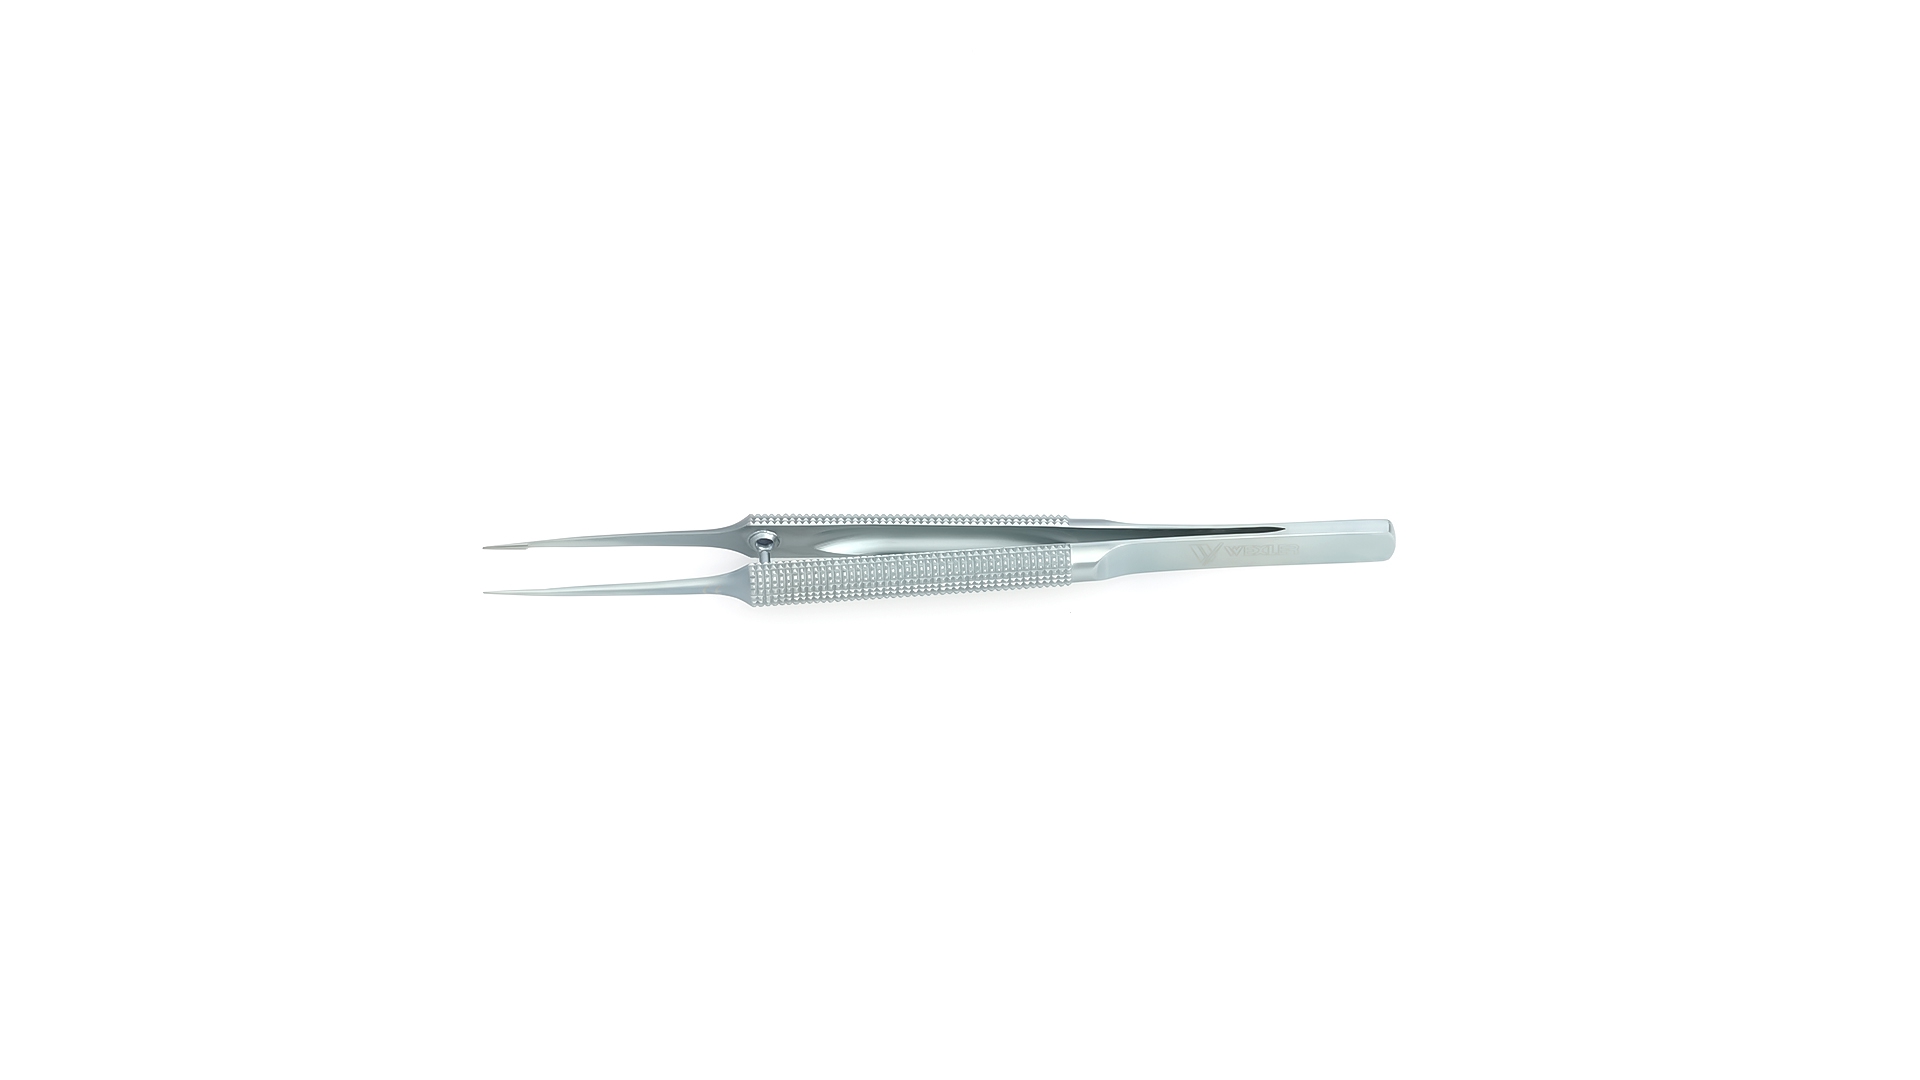 Micro Forceps - Straight 0.4mm concave/convex tips